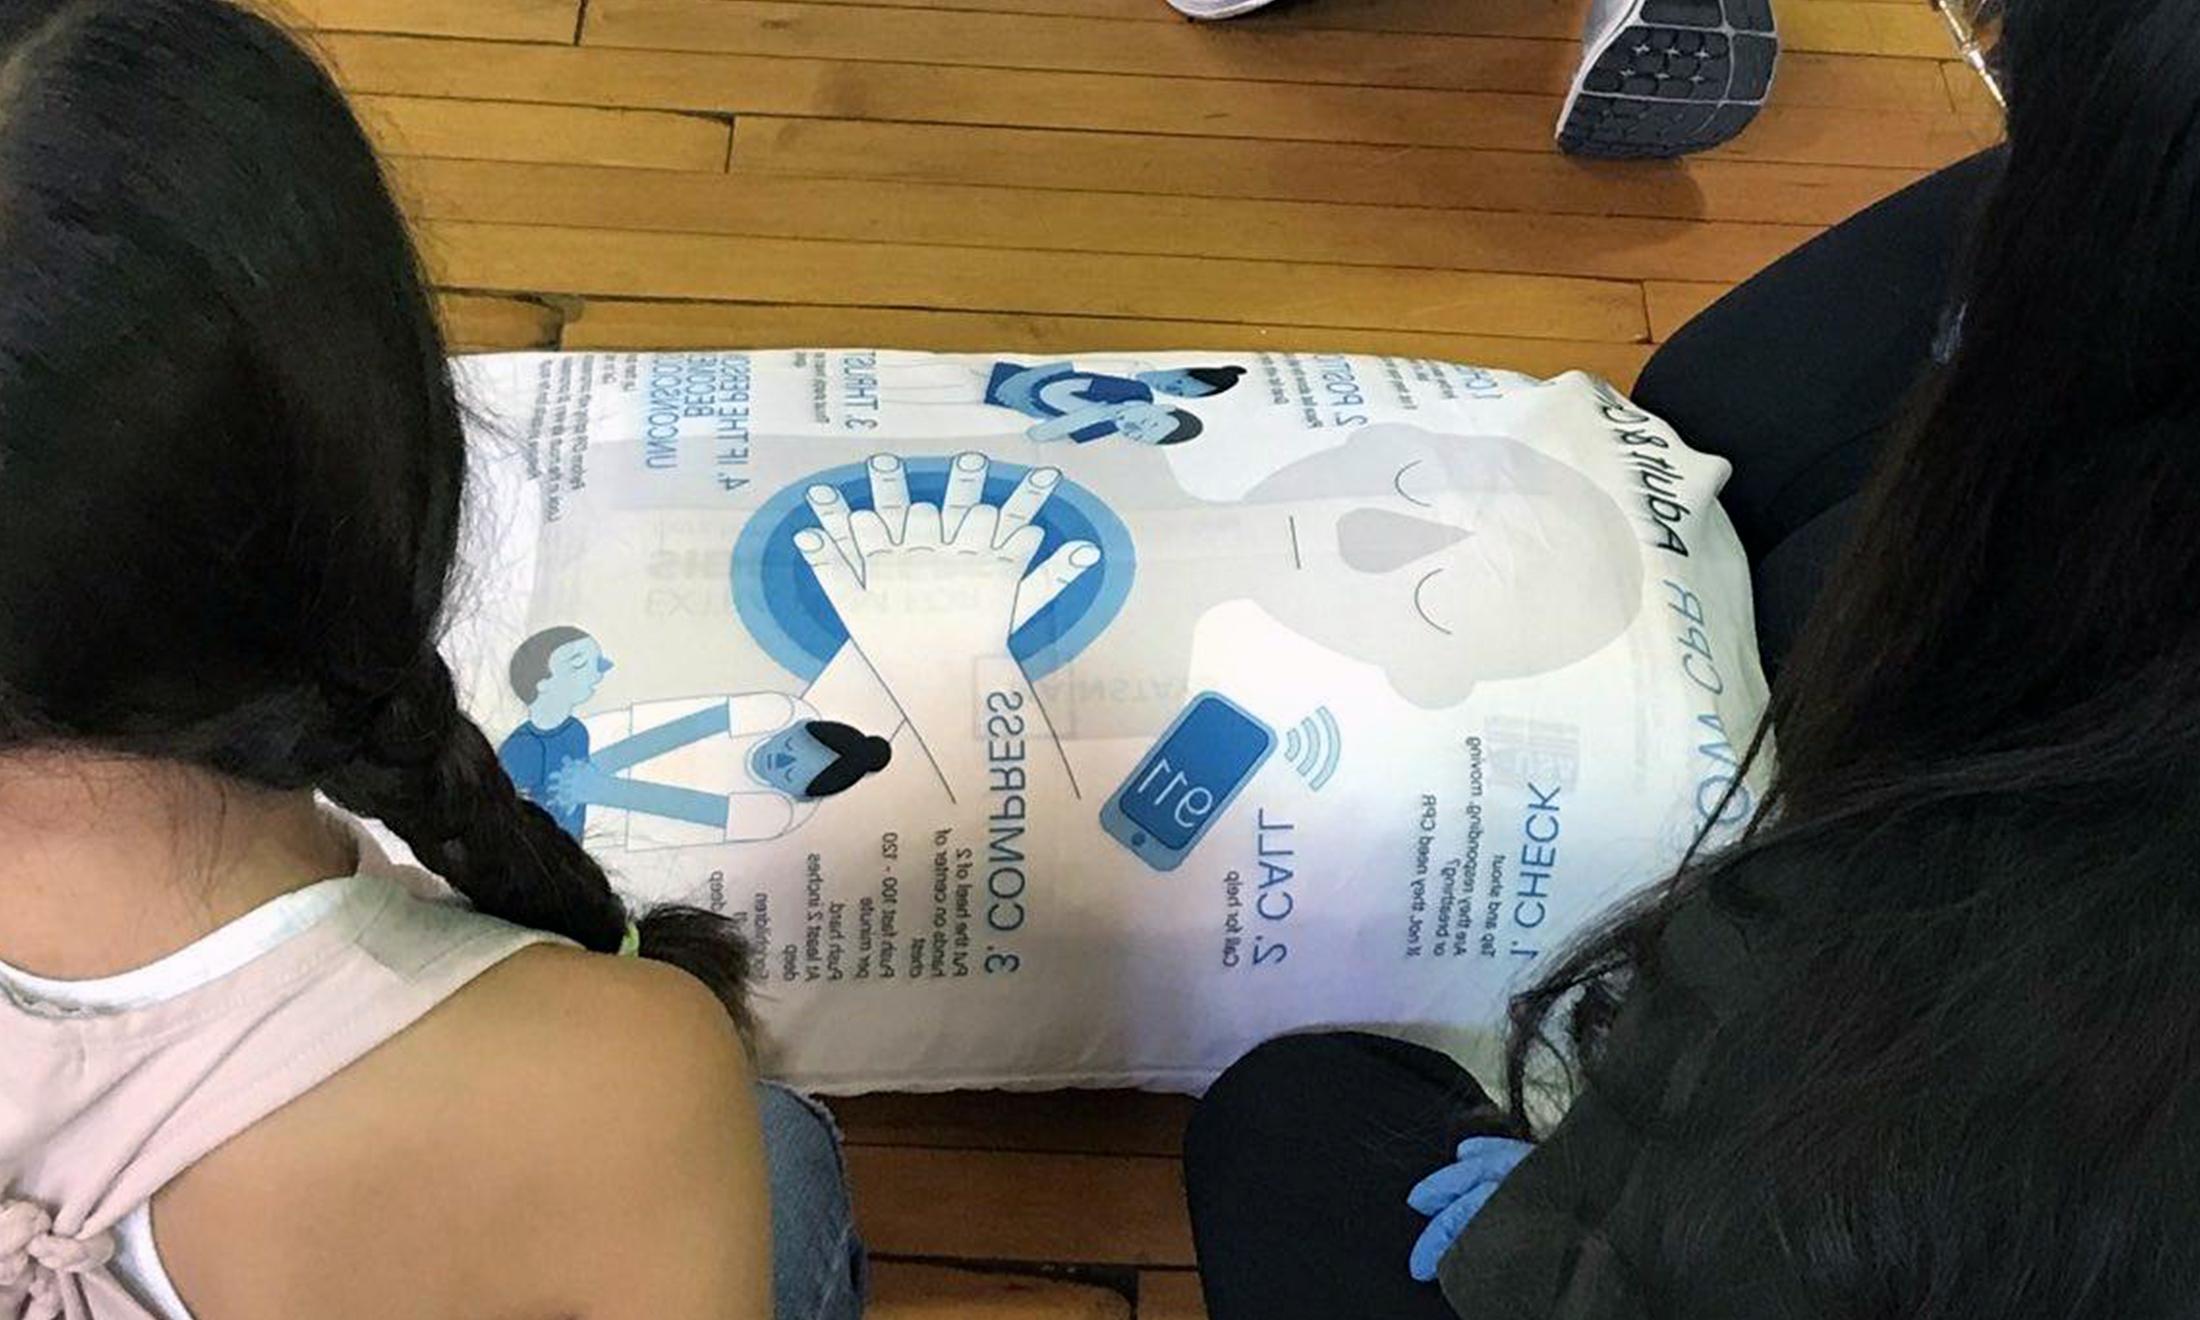 An image of Goldstein's pillow being used in training